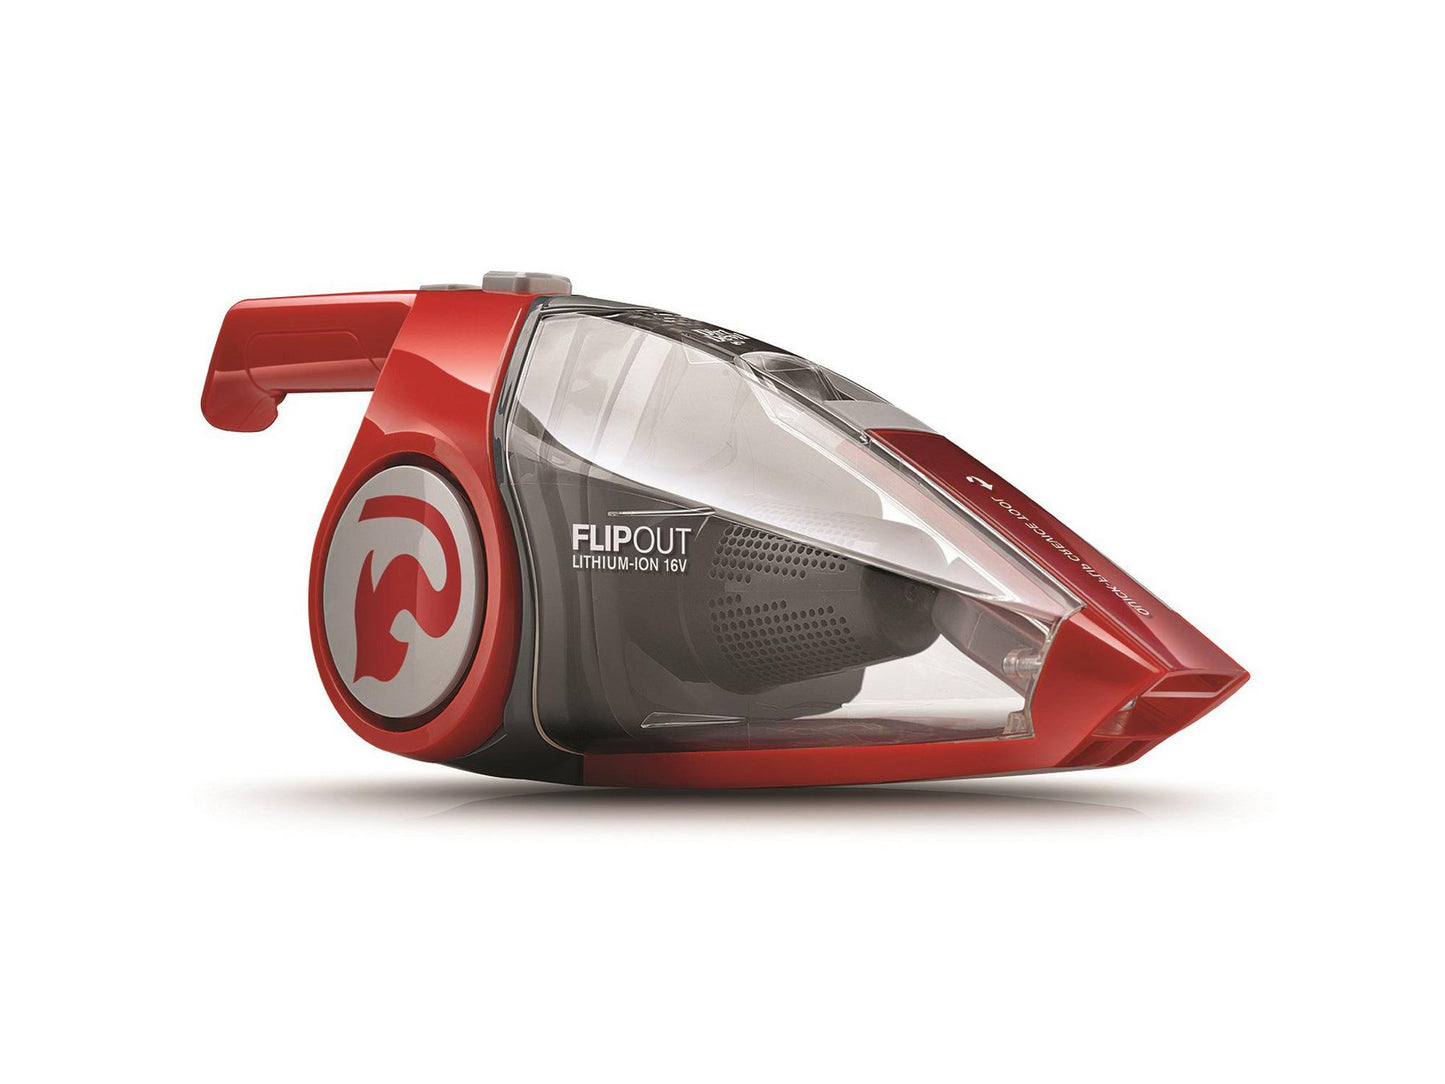 Reconditioned Flipout Lithium Powered Cordless Hand Vac